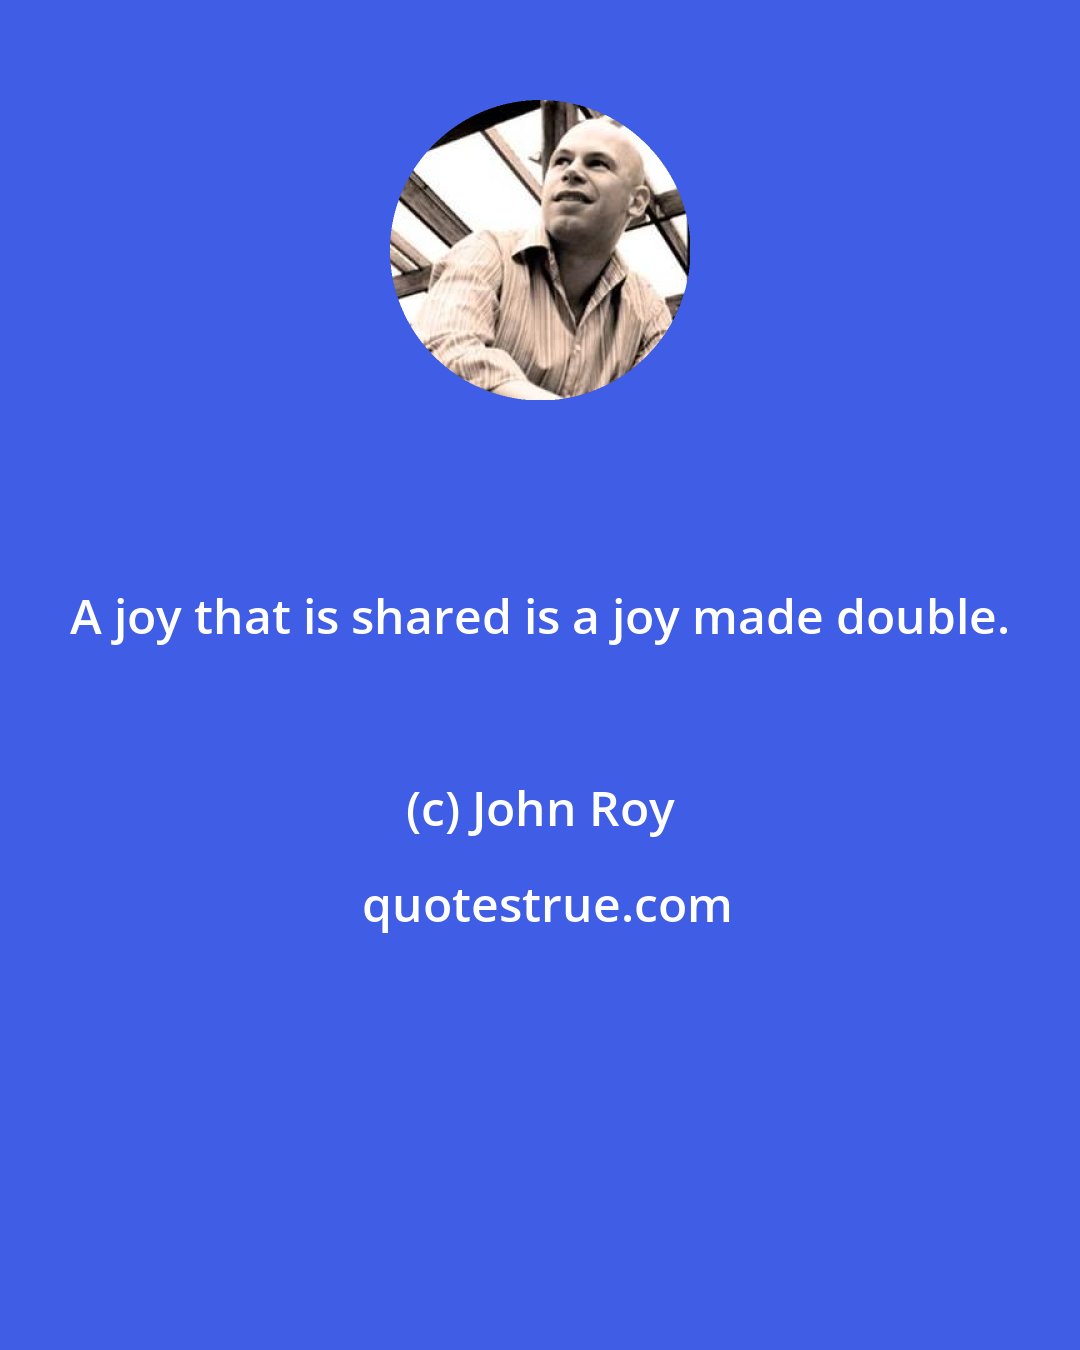 John Roy: A joy that is shared is a joy made double.